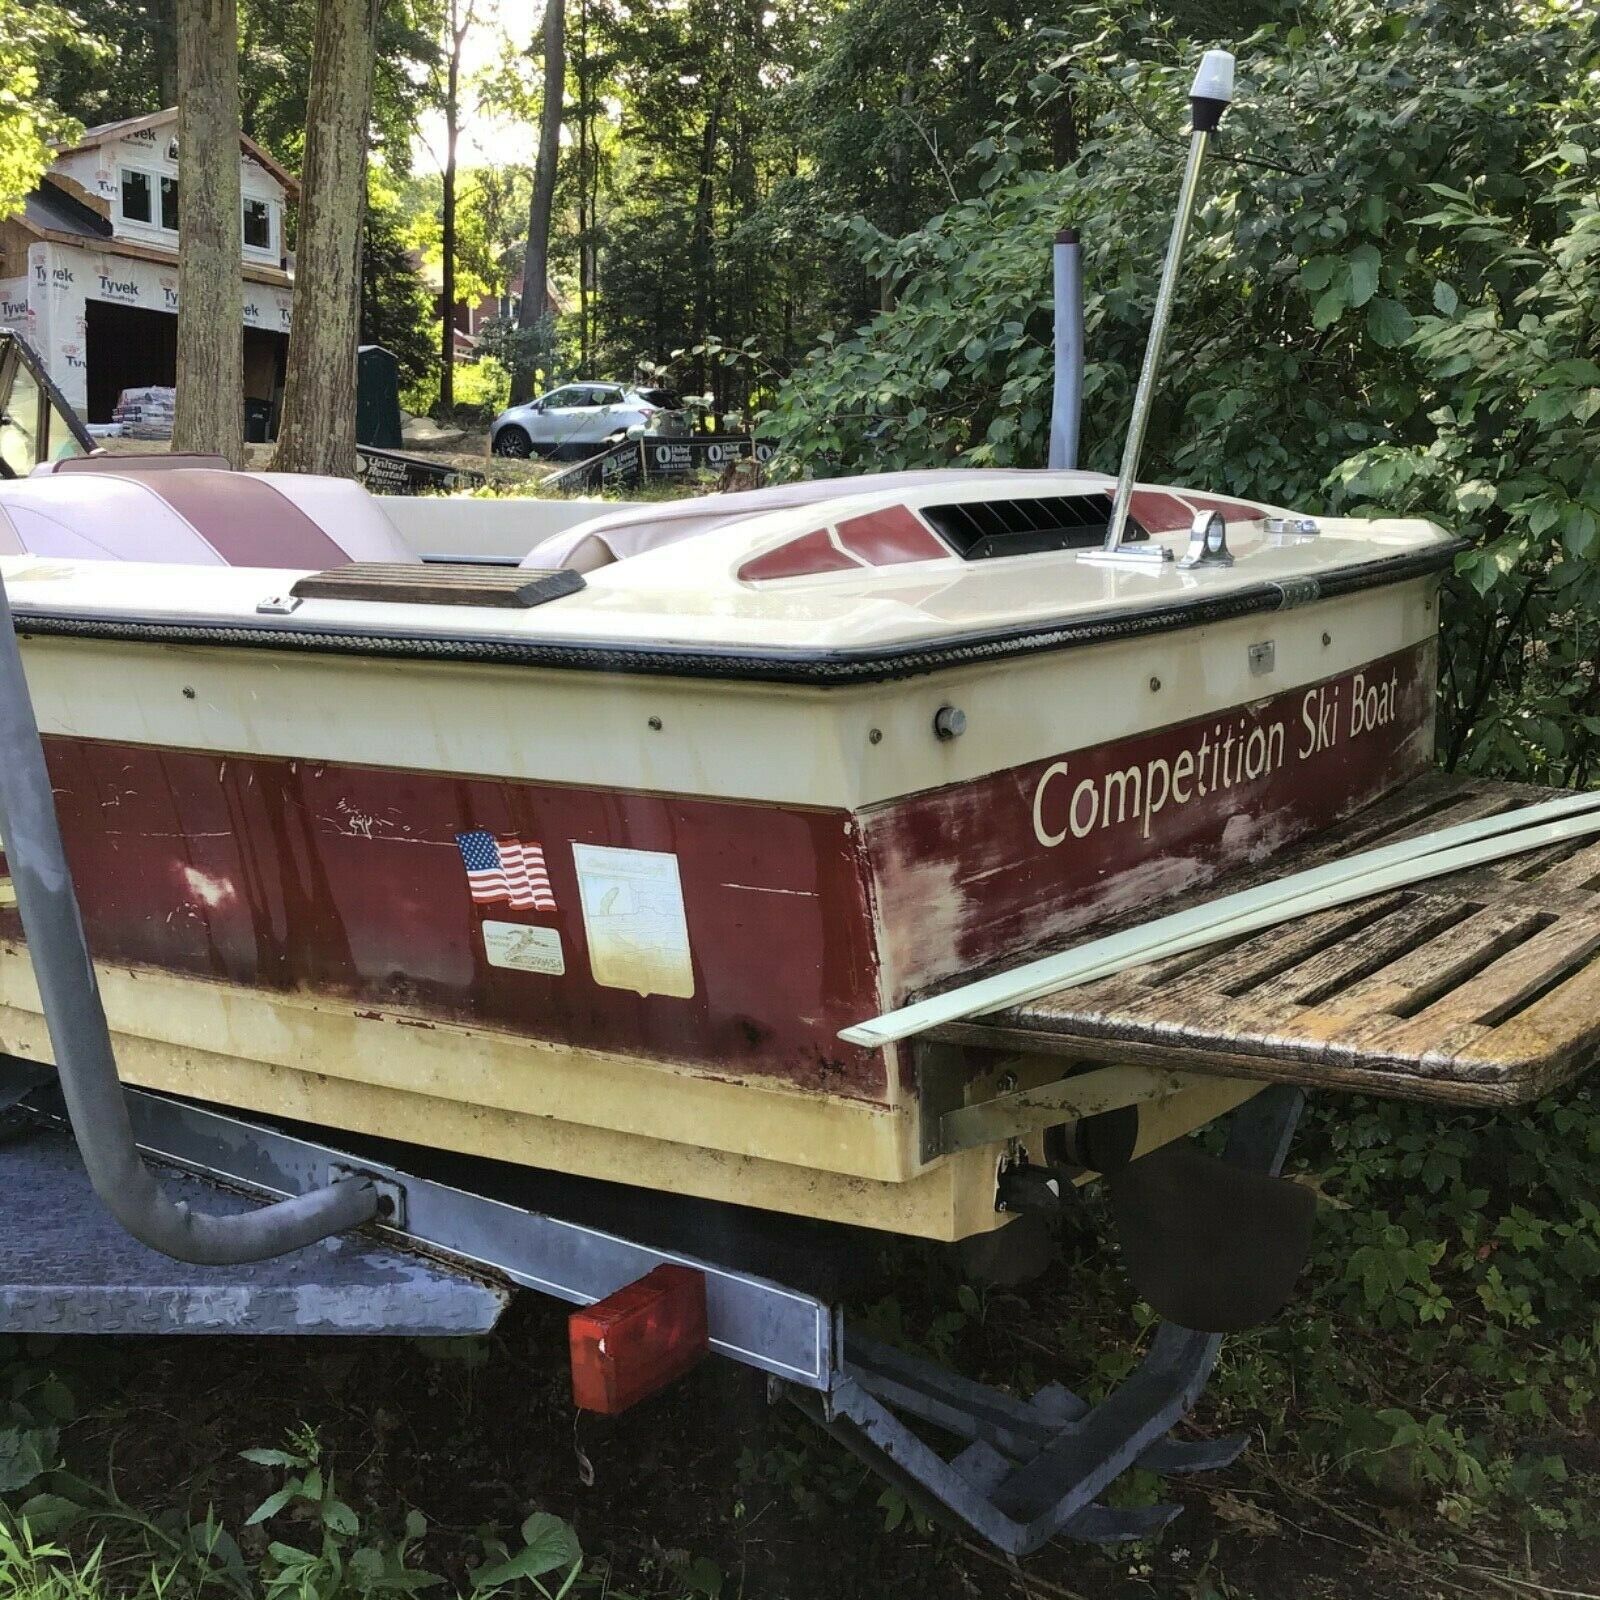 Correct Craft 1983 for sale for $3,200 - Boats-from-USA.com